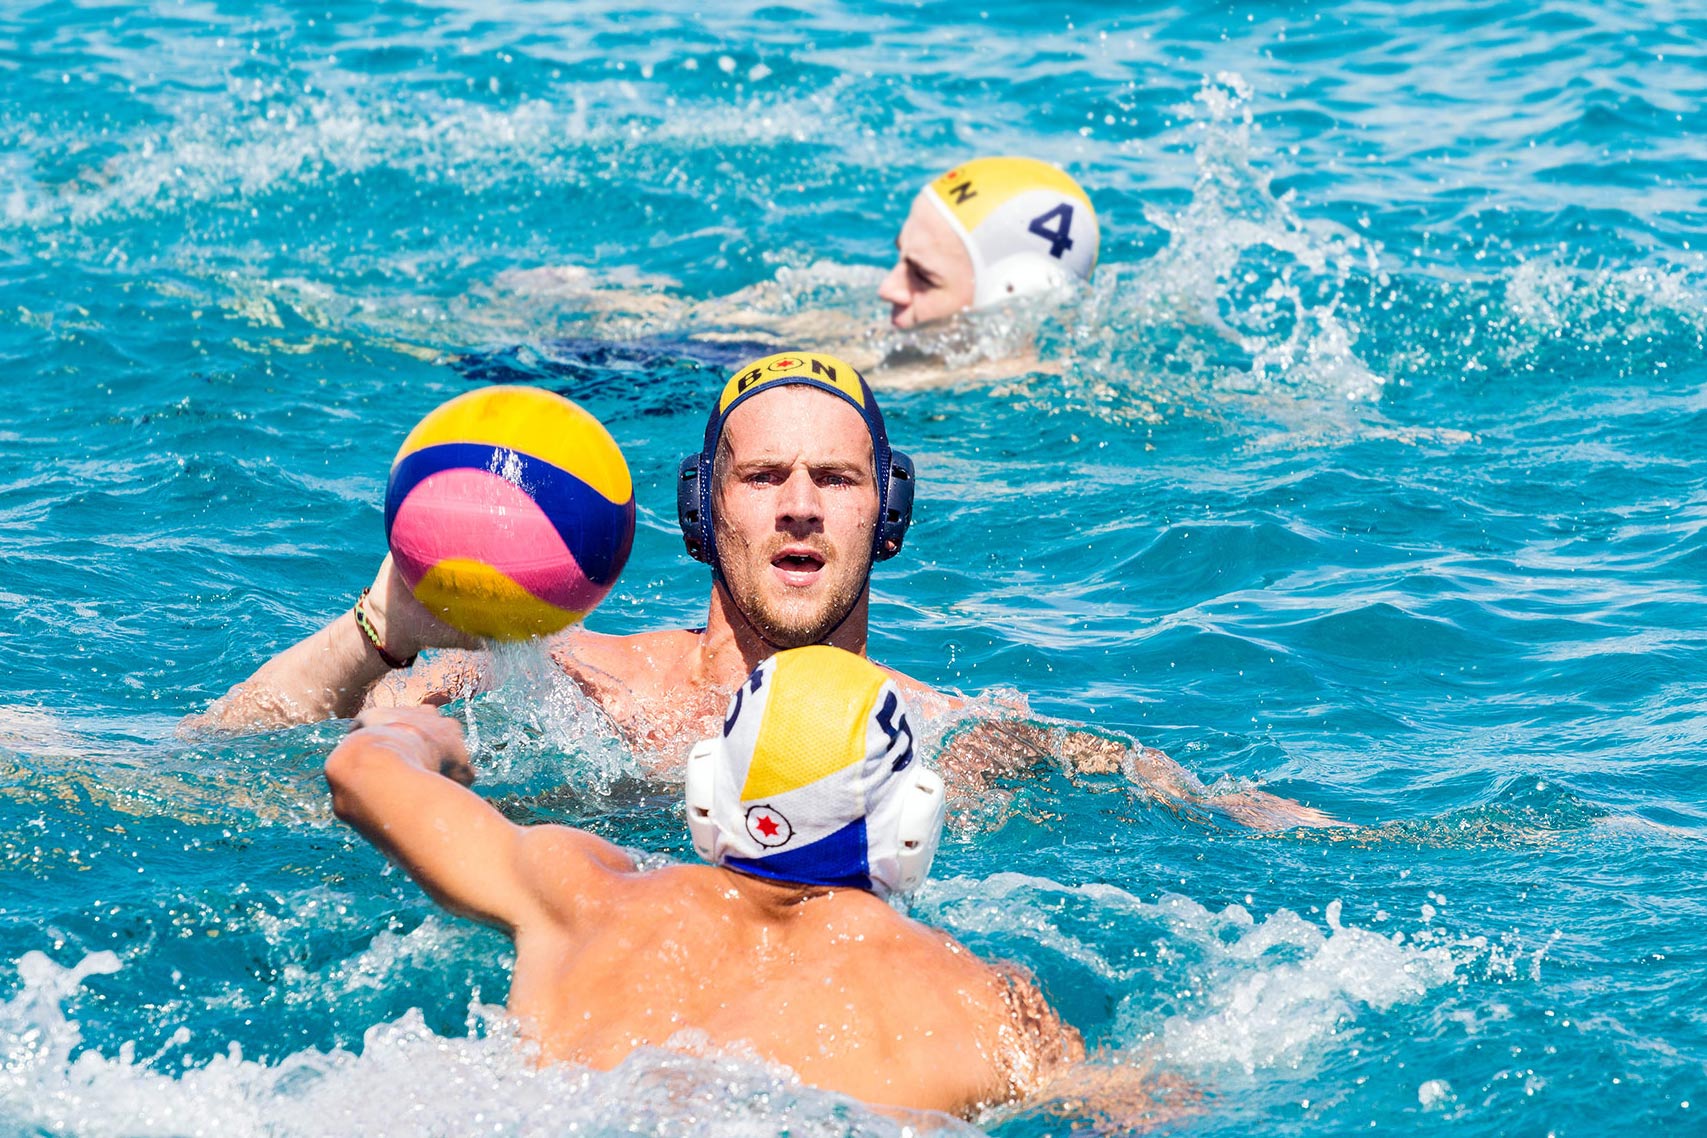 Water polo being introduced to North Bay - North Bay News